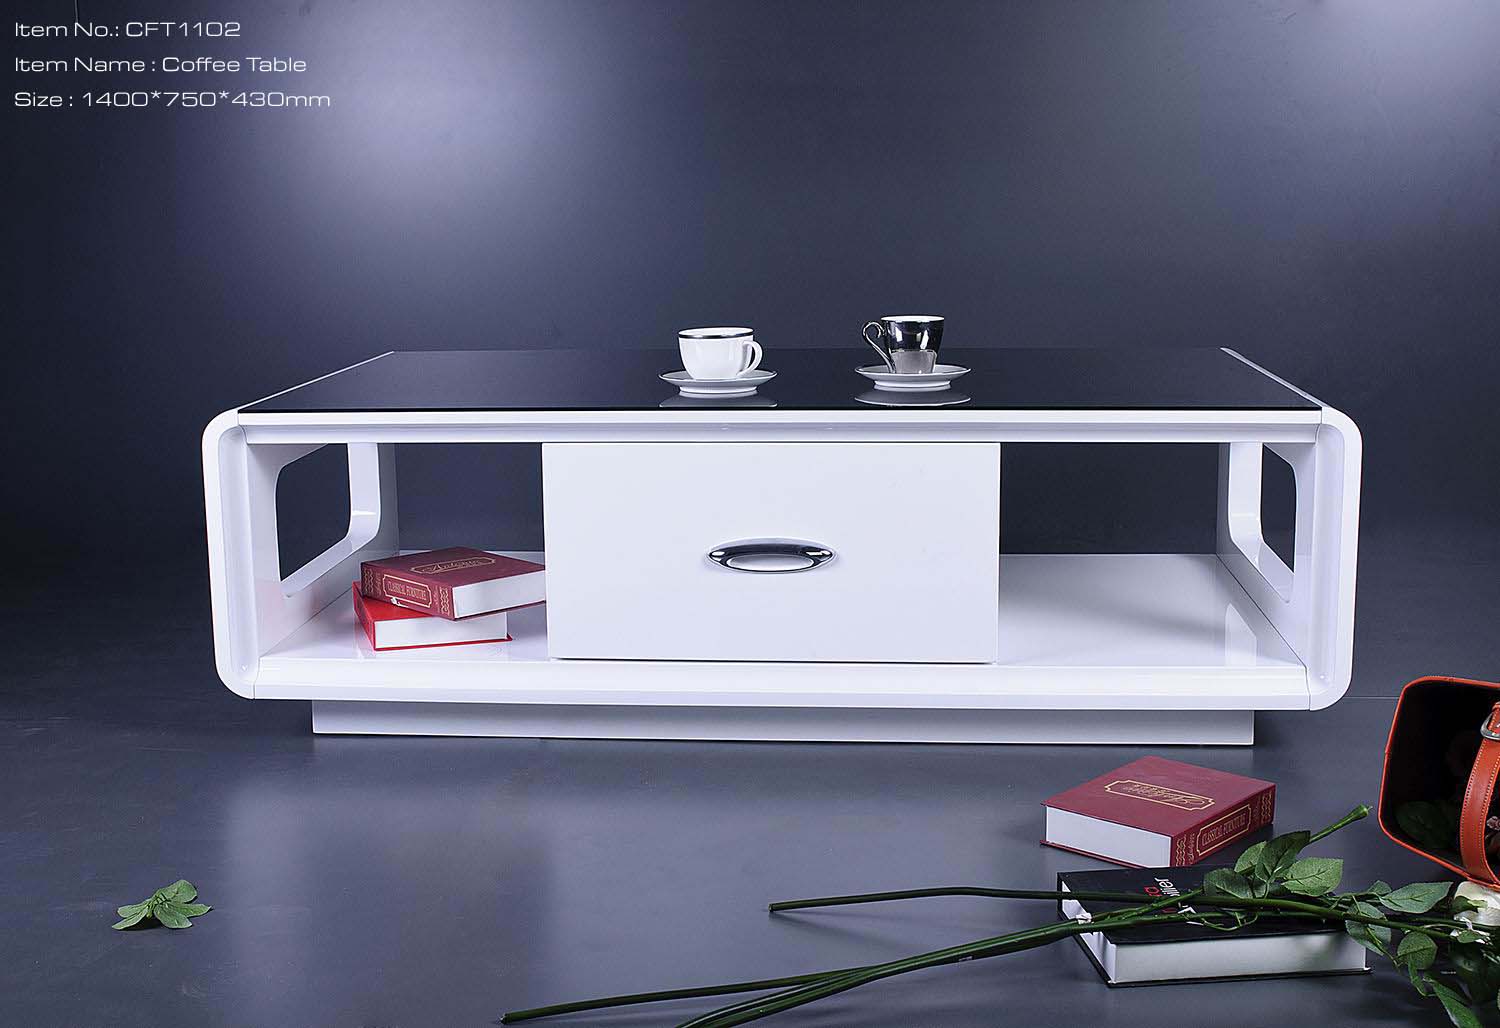 CFT1102 COFFEE TABLE